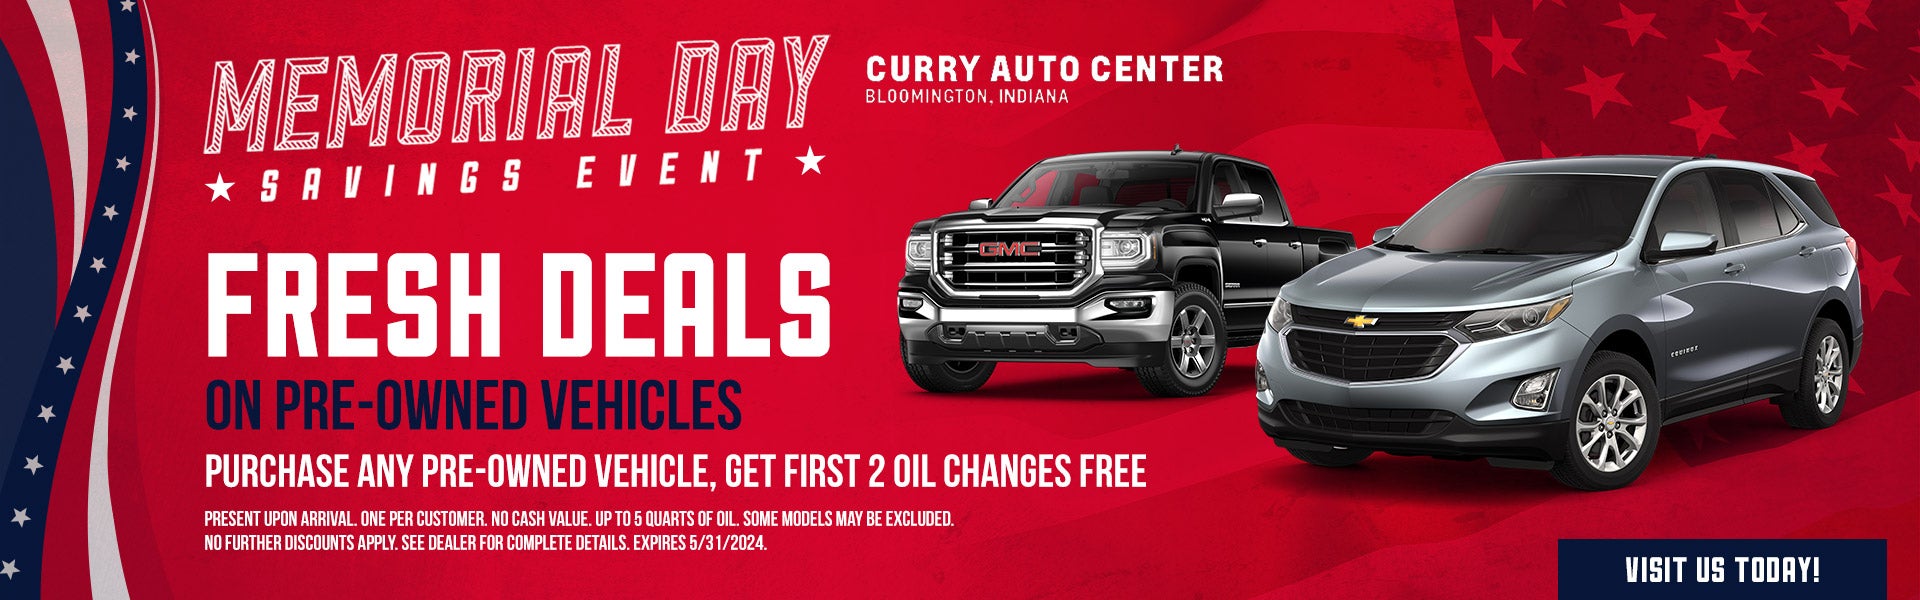 Pre-Owned Vehicles | Curry Auto Center | Bloomington, IN